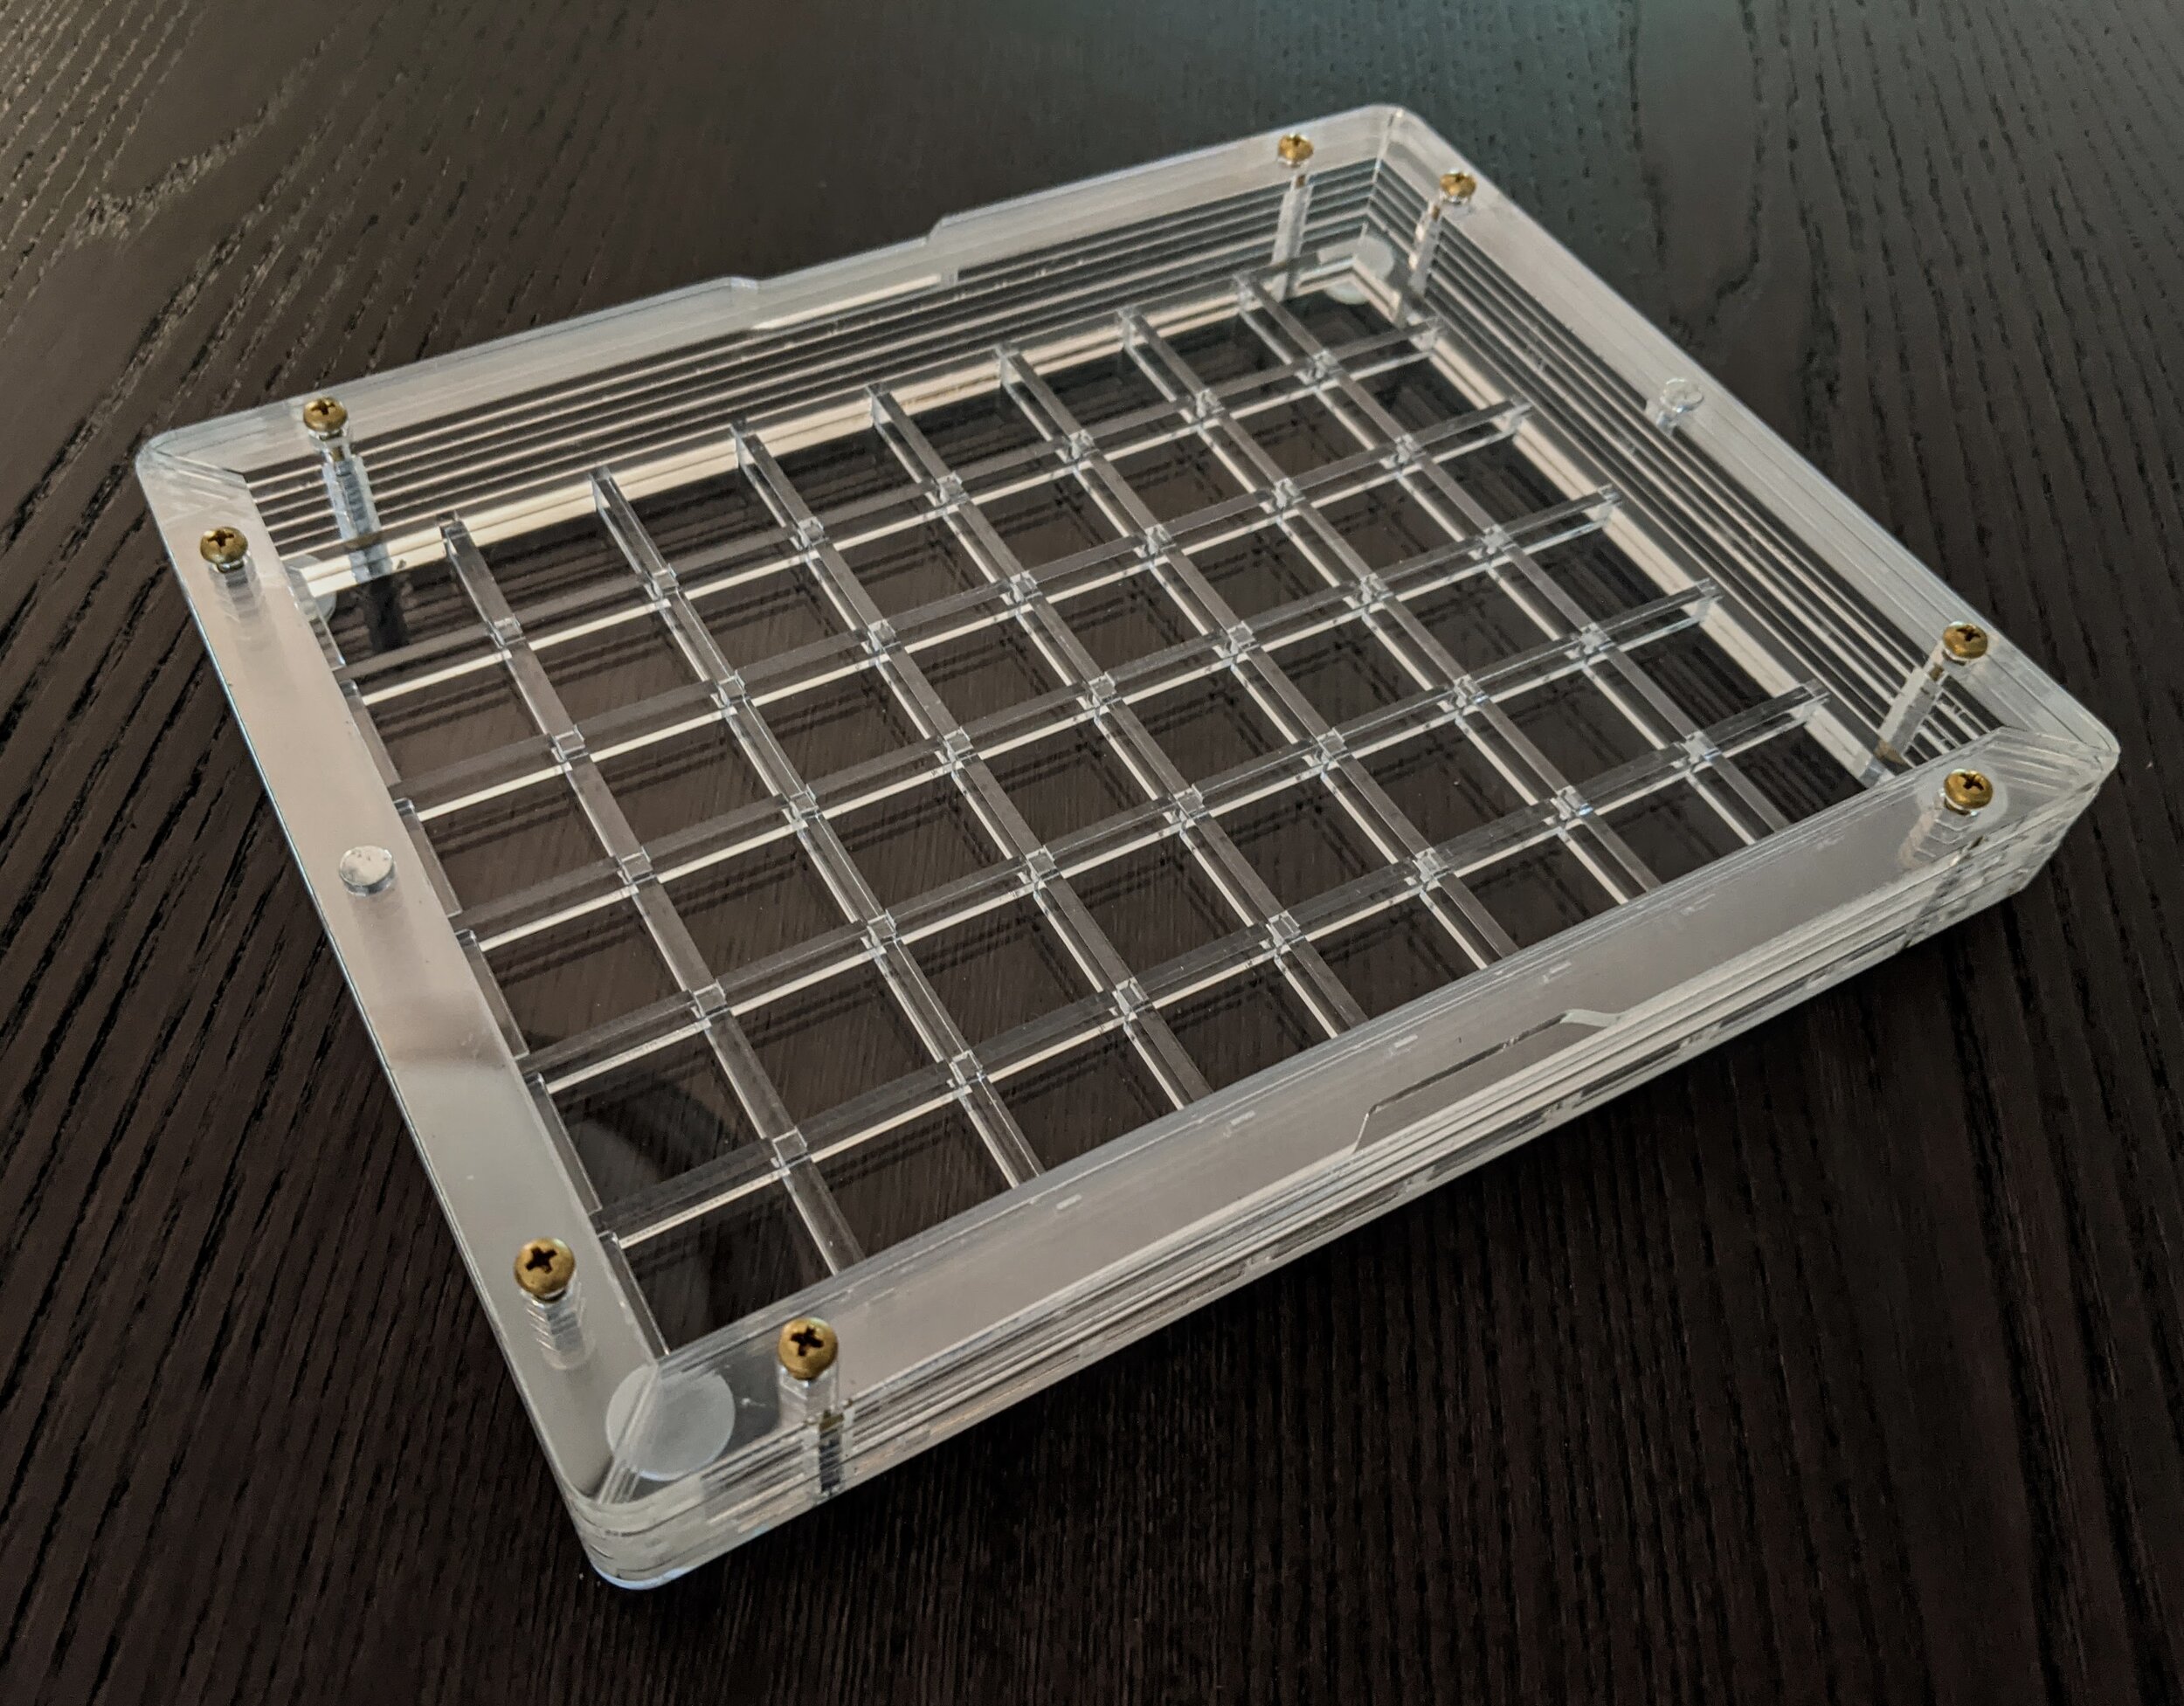  Picture of the first prototype! Fitment of the dividers need a few small tweaks that will be finalized with the new acrylic supplier.  